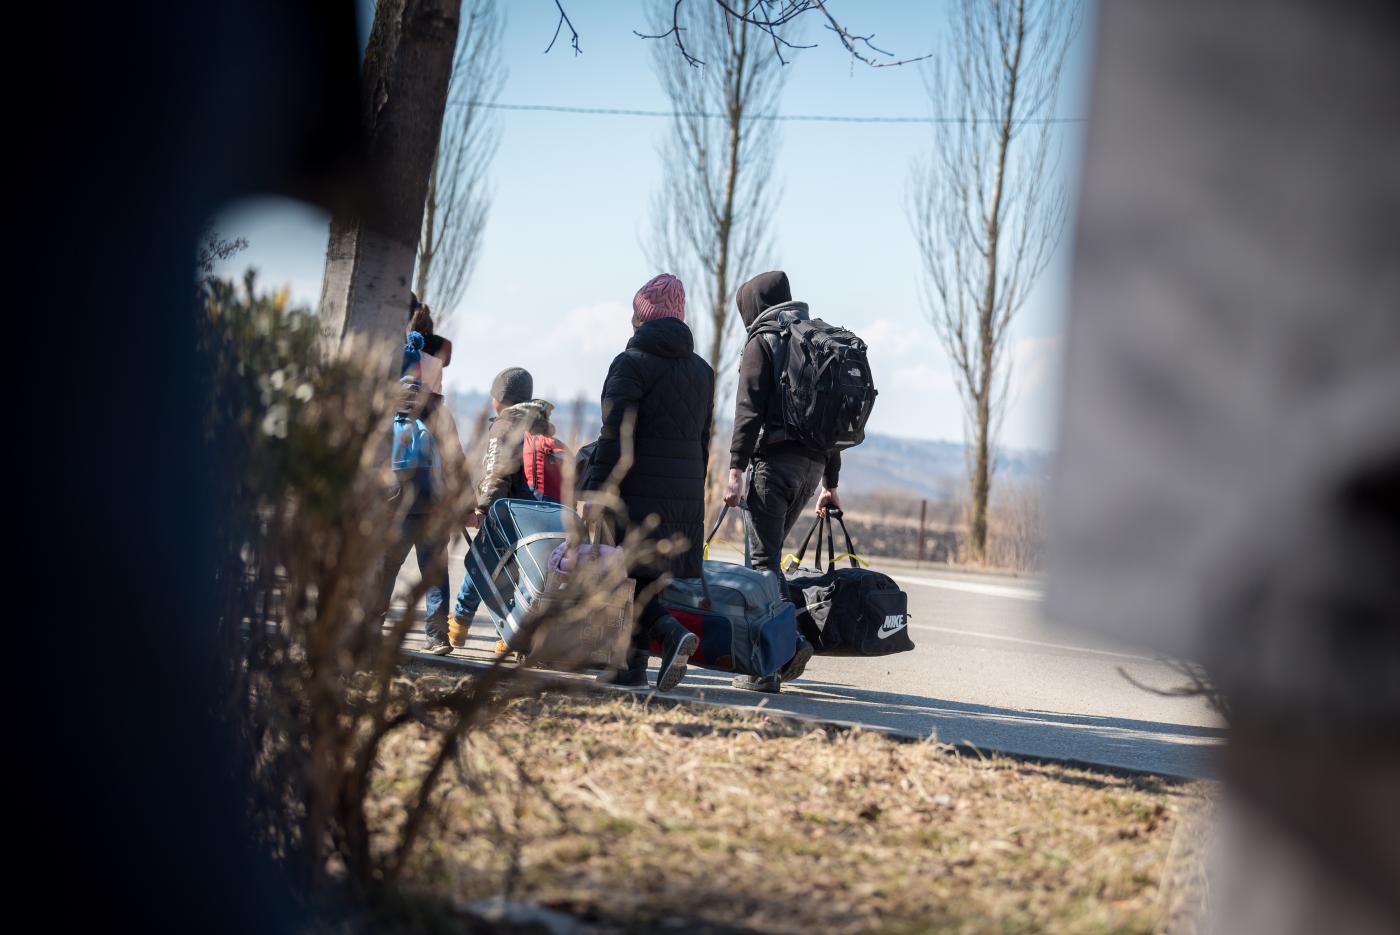 A refugee family from Ukraine arrives at border crossing in Romania